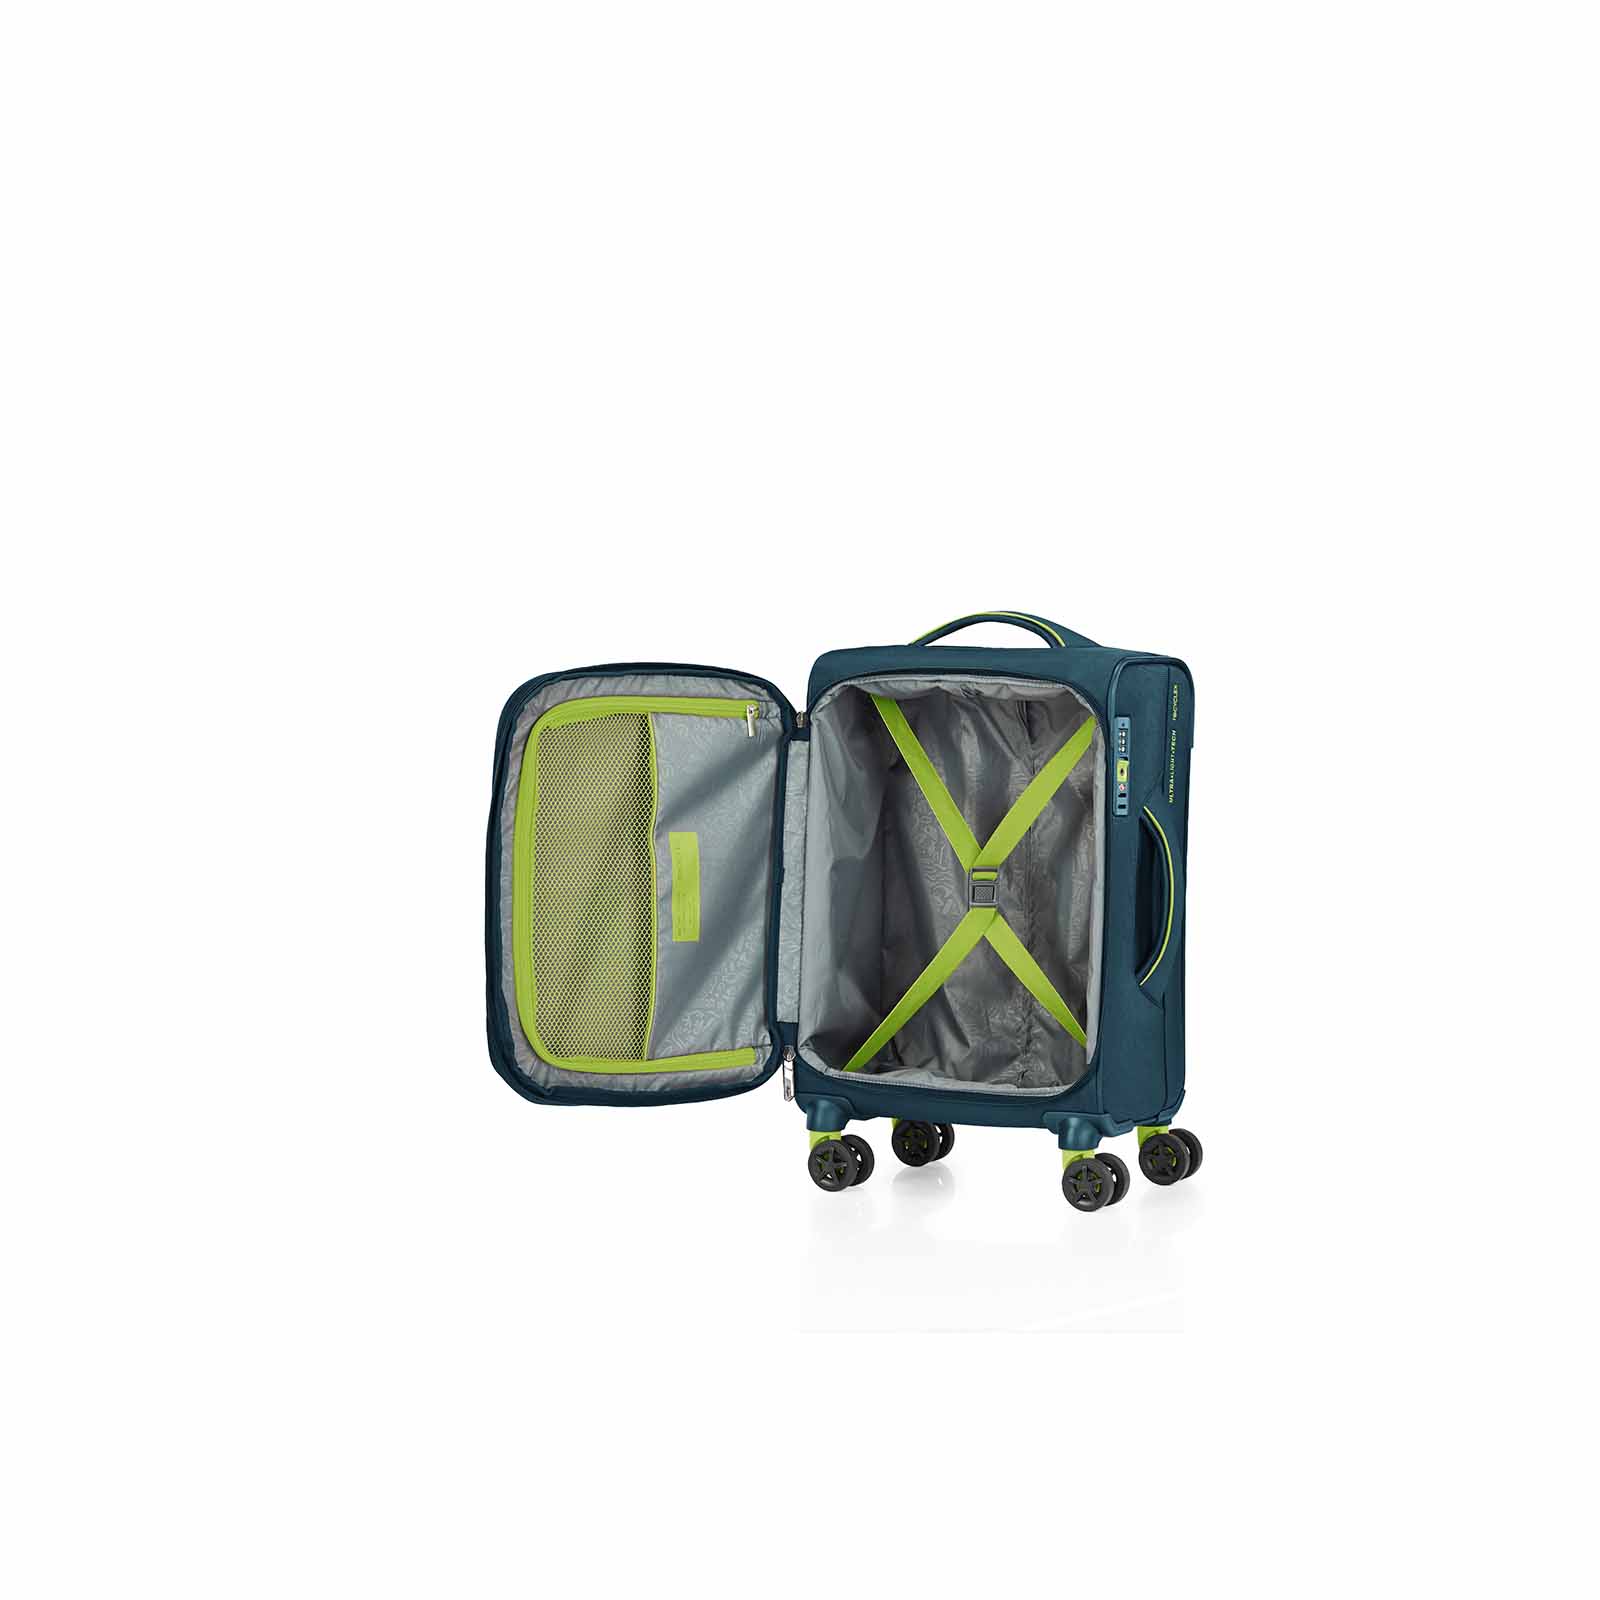 American-Tourister-Applite-4-Eco-55cm-Carry-On-Suitcase-Varsity-Green-Open